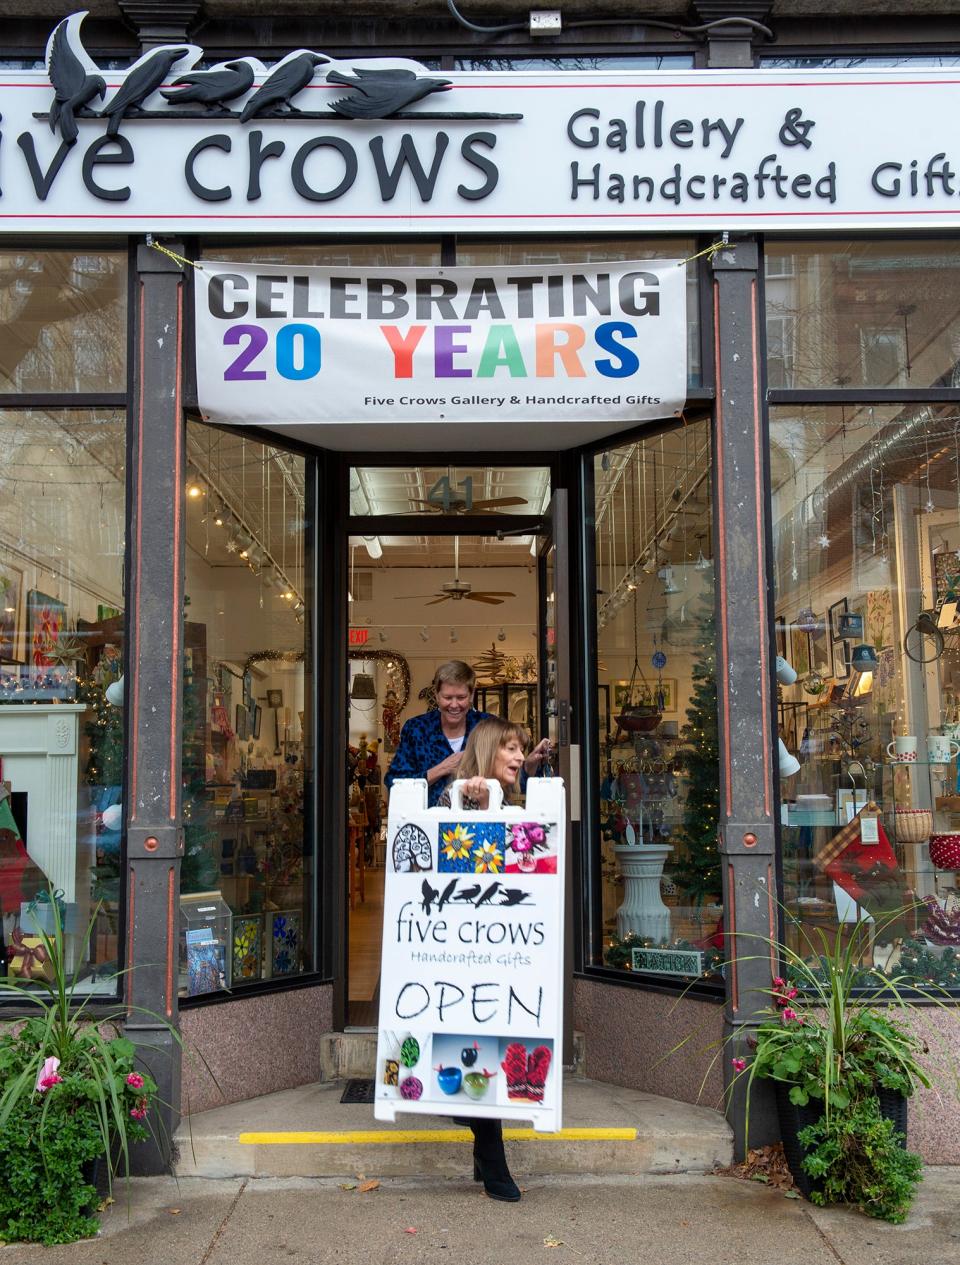 Sherry Anderson, one of three co-owners of Five Crows Gallery & Handcrafted Gifts in Natick, and Stephanie Childs, with sign, open the store on Nov. 25. Five Crows is celebrating its 20th anniversary with an open house from 5-8 p.m. on Dec. 8.